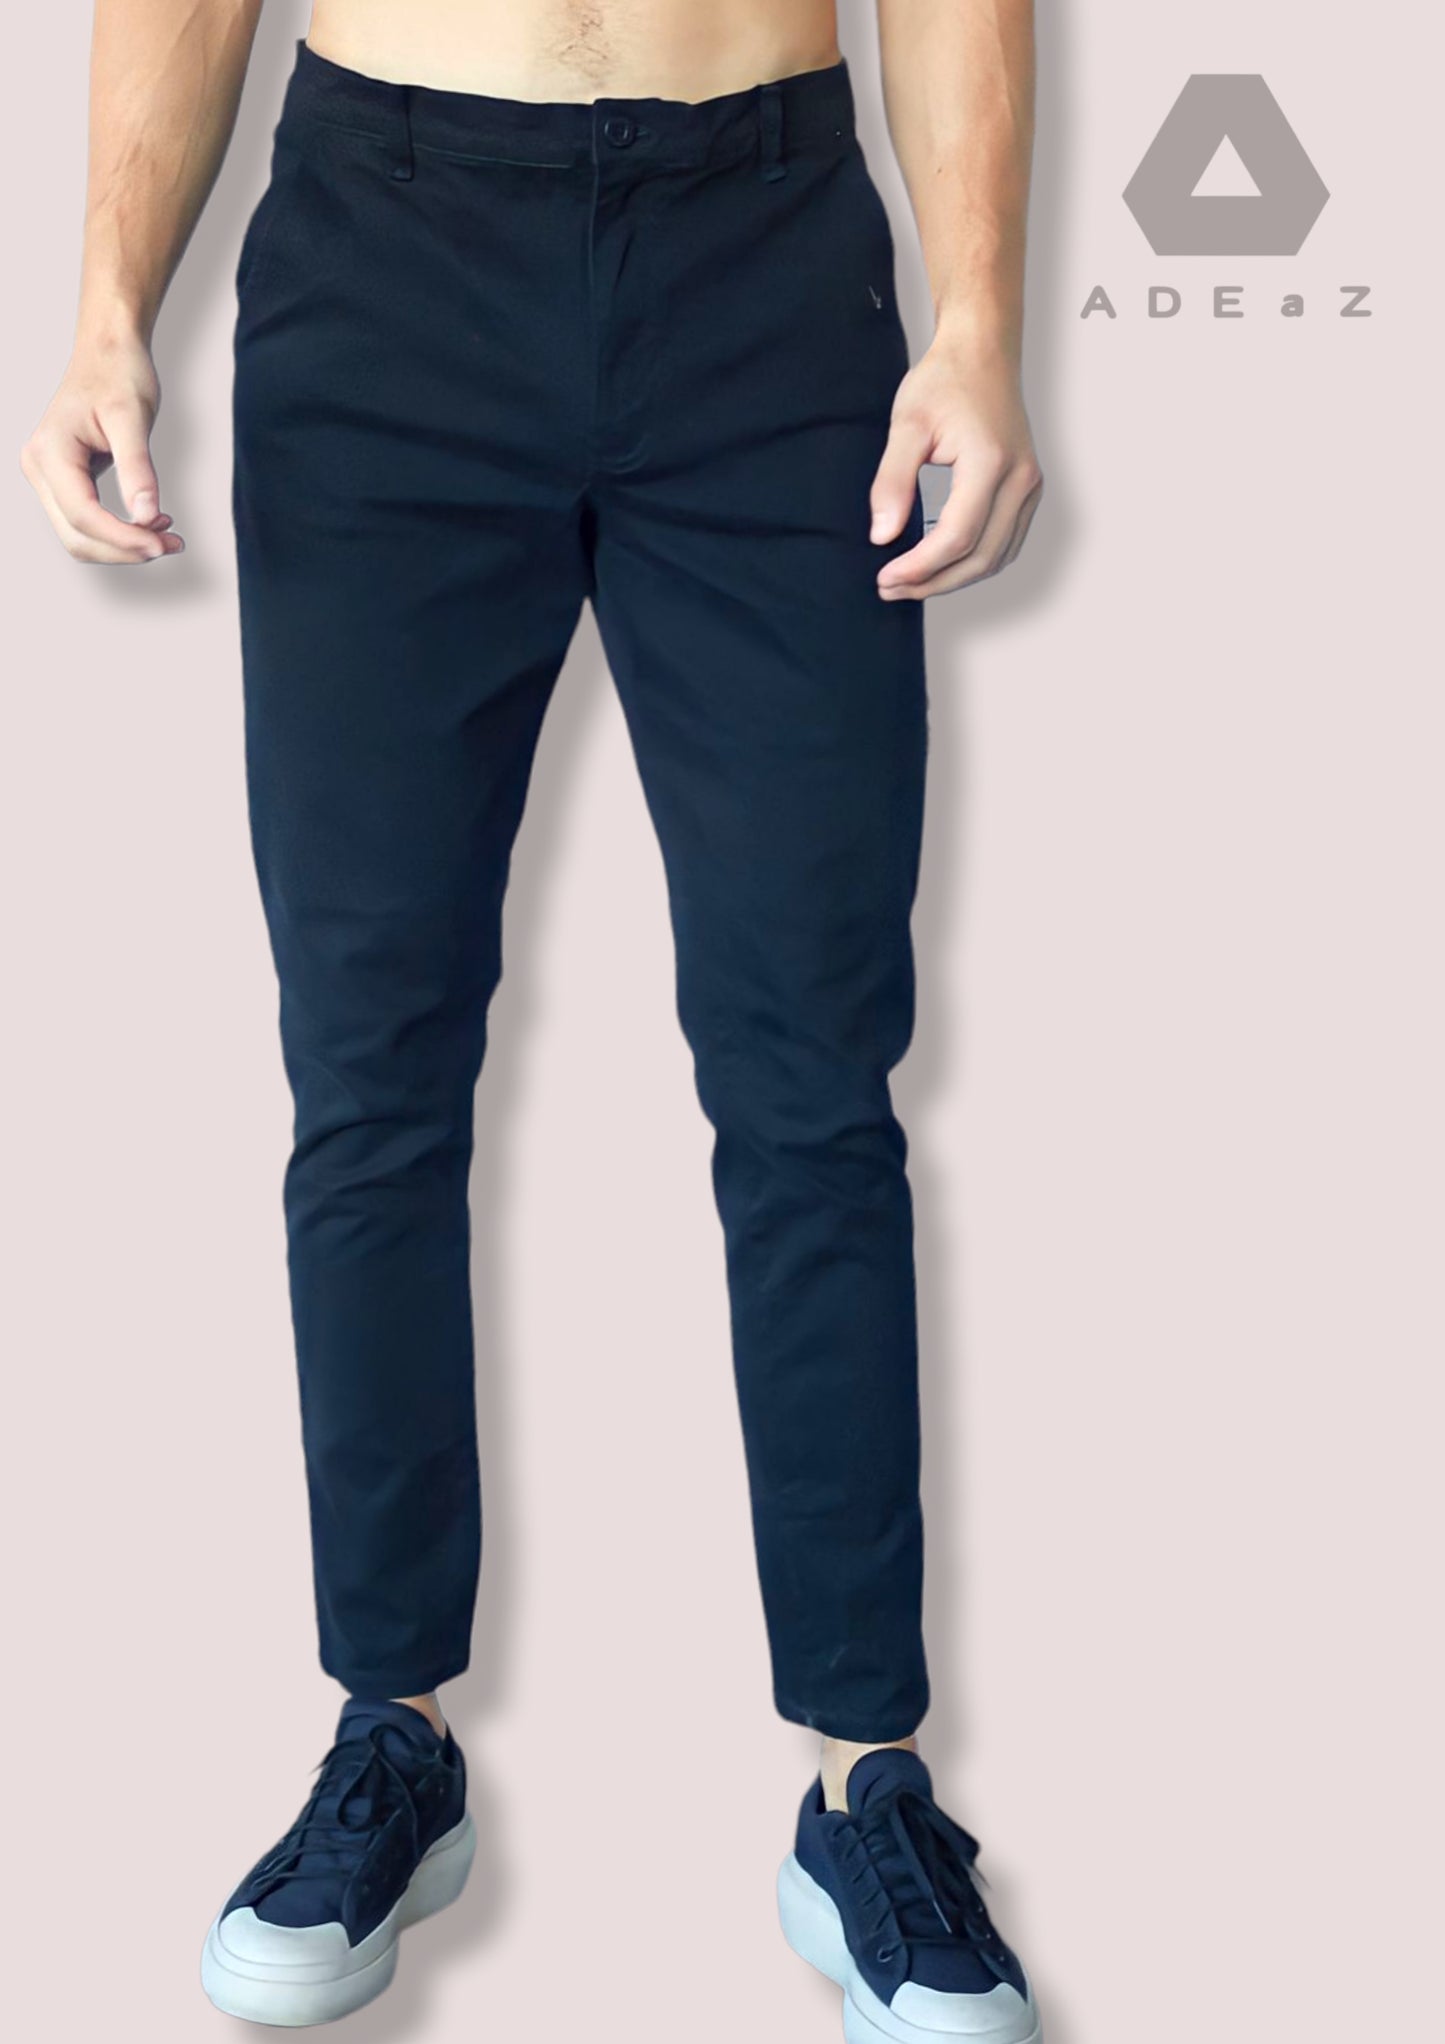 Men's Chino Pants: Classic and versatile chino pants for men, ideal for casual or semi-formal wear.